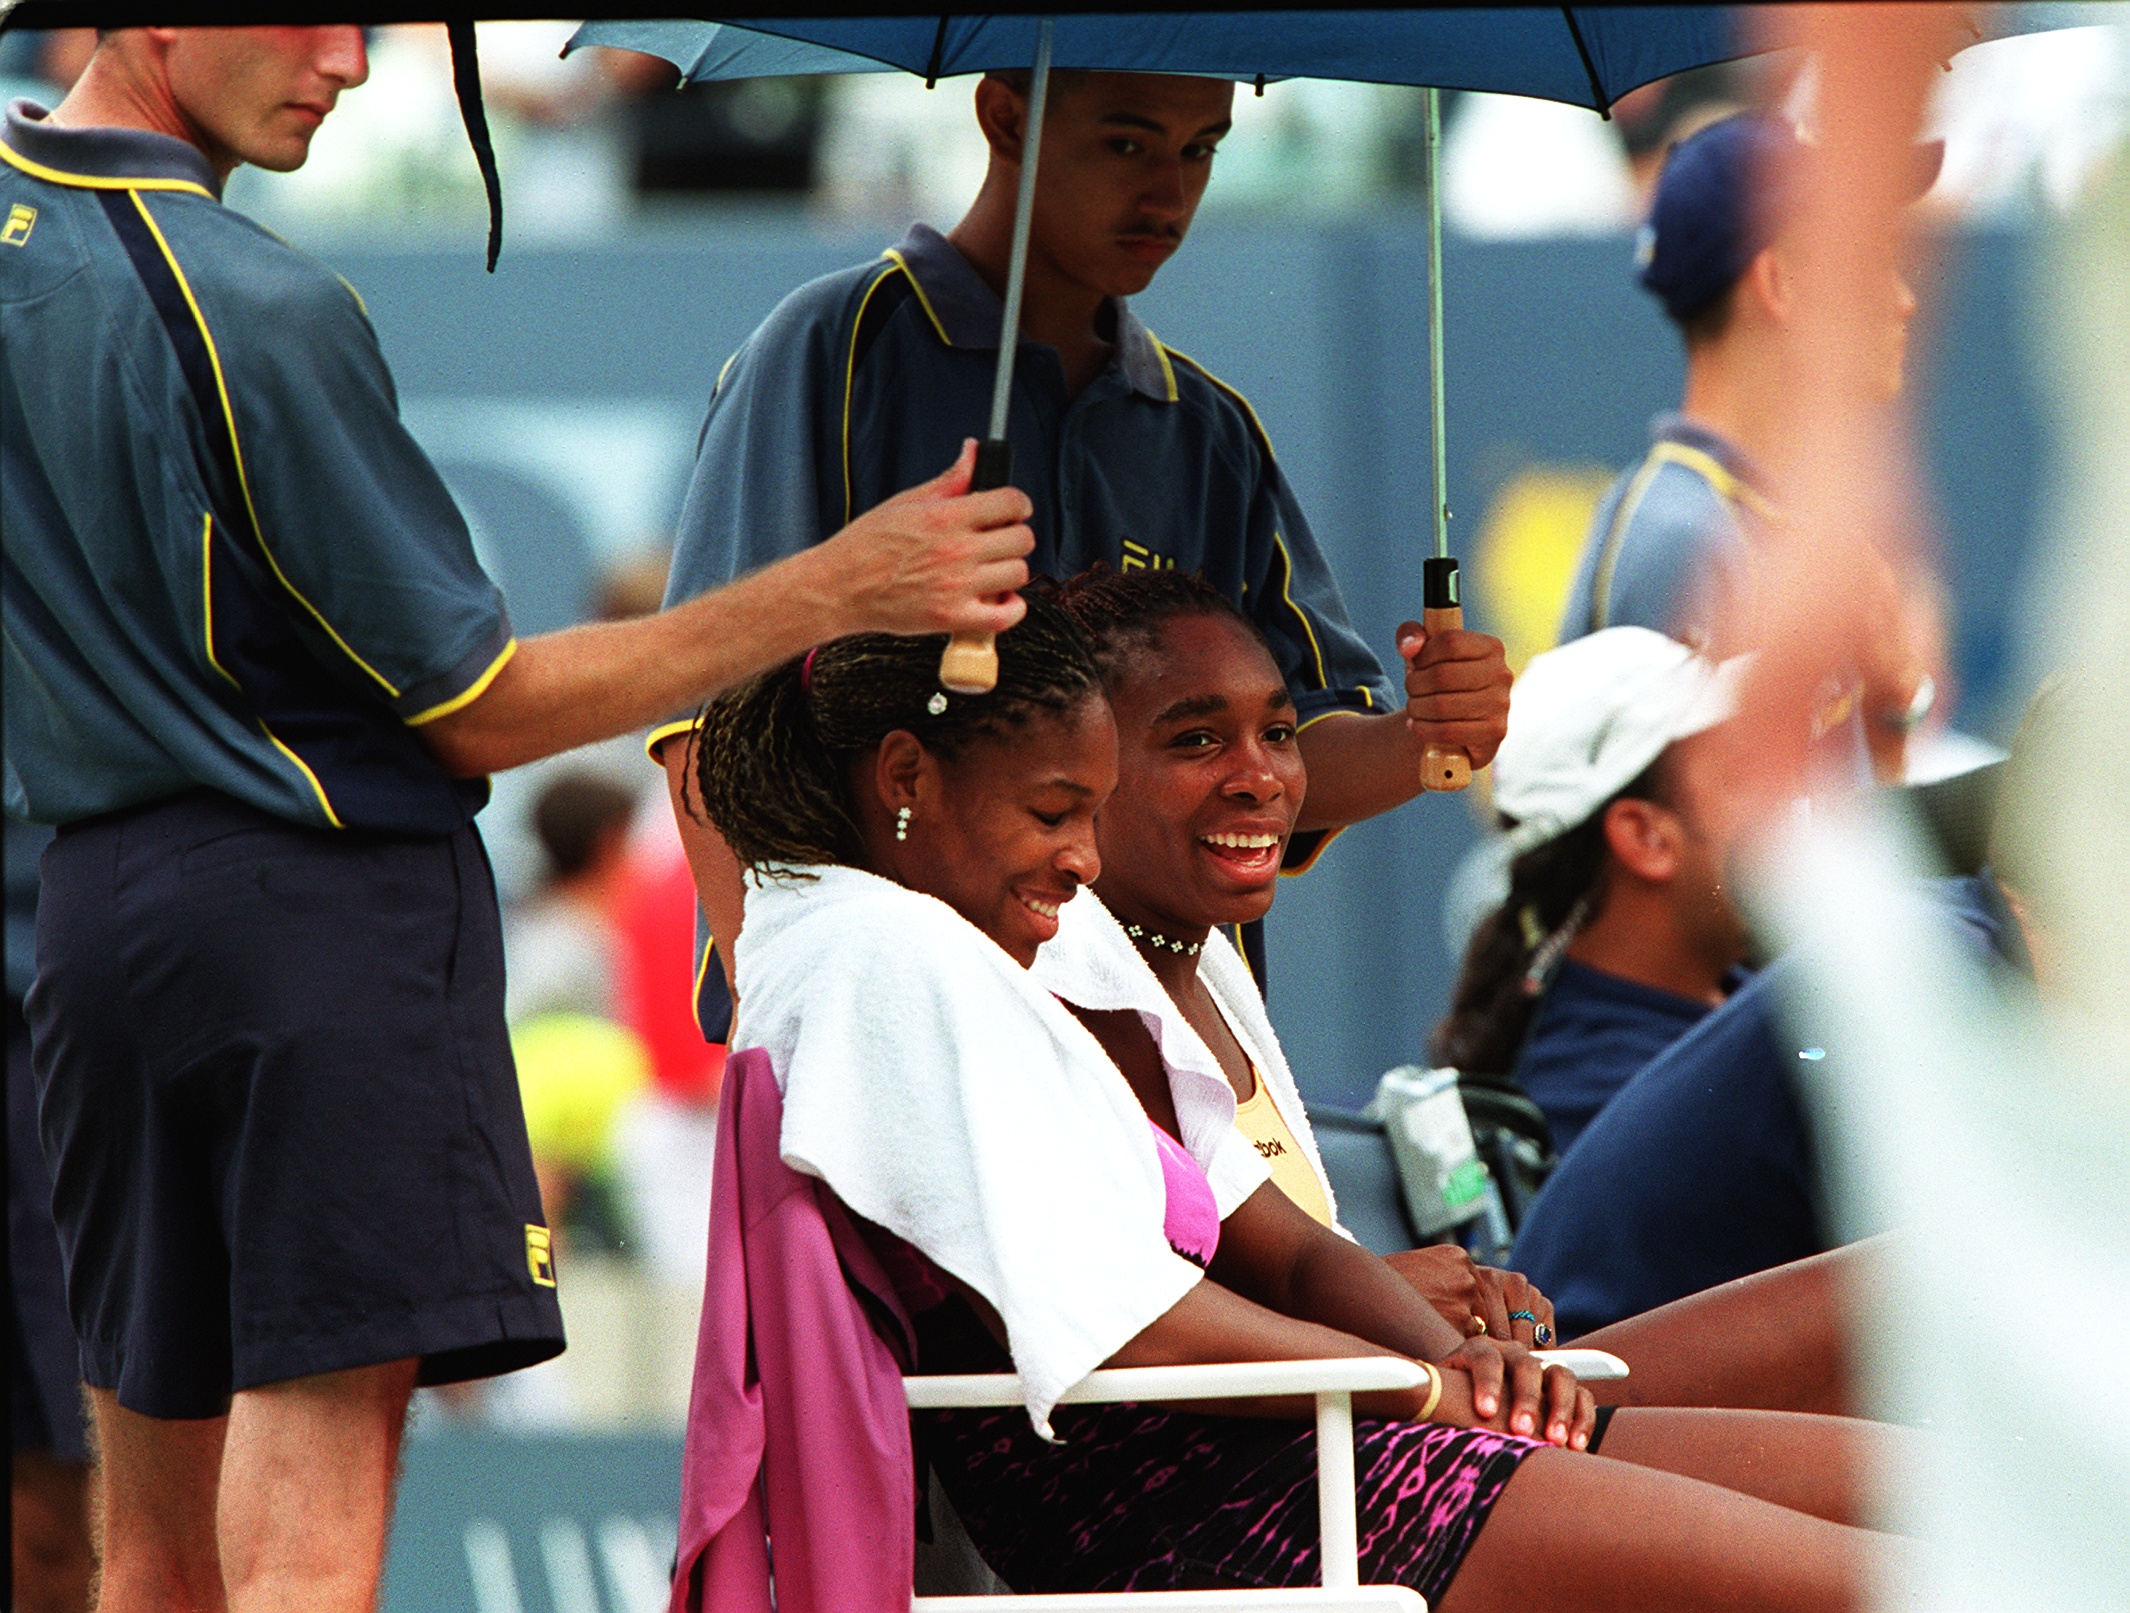 Serena Williams and sister Venus Williams in Flushing Meadows, New York on August 30,2000. | Source: Getty Images